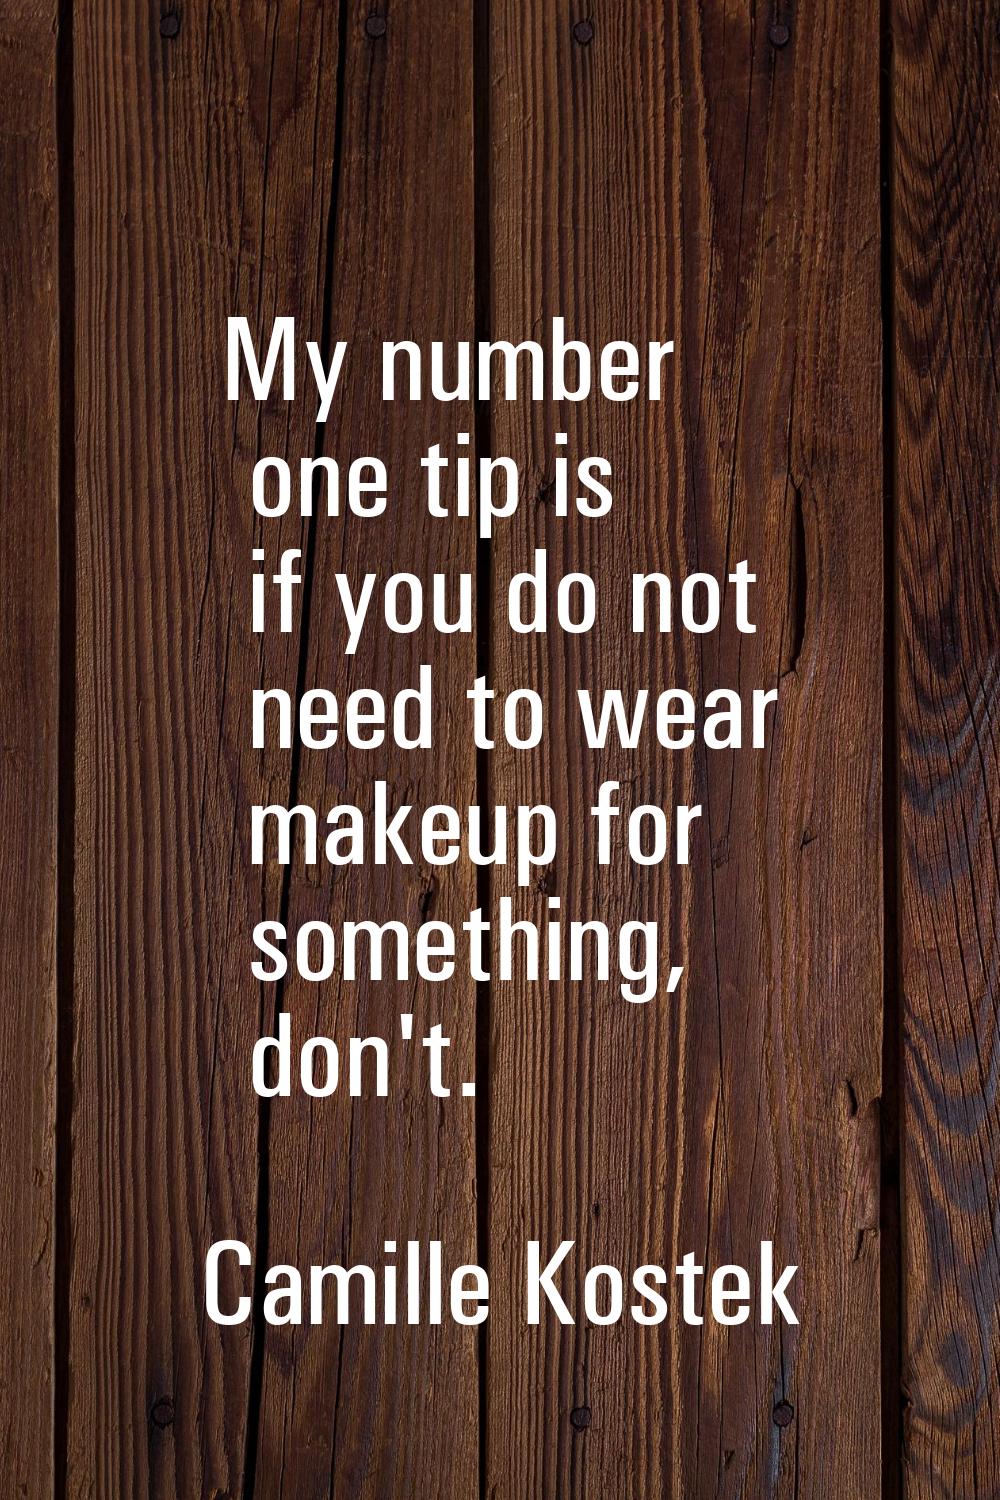 My number one tip is if you do not need to wear makeup for something, don't.